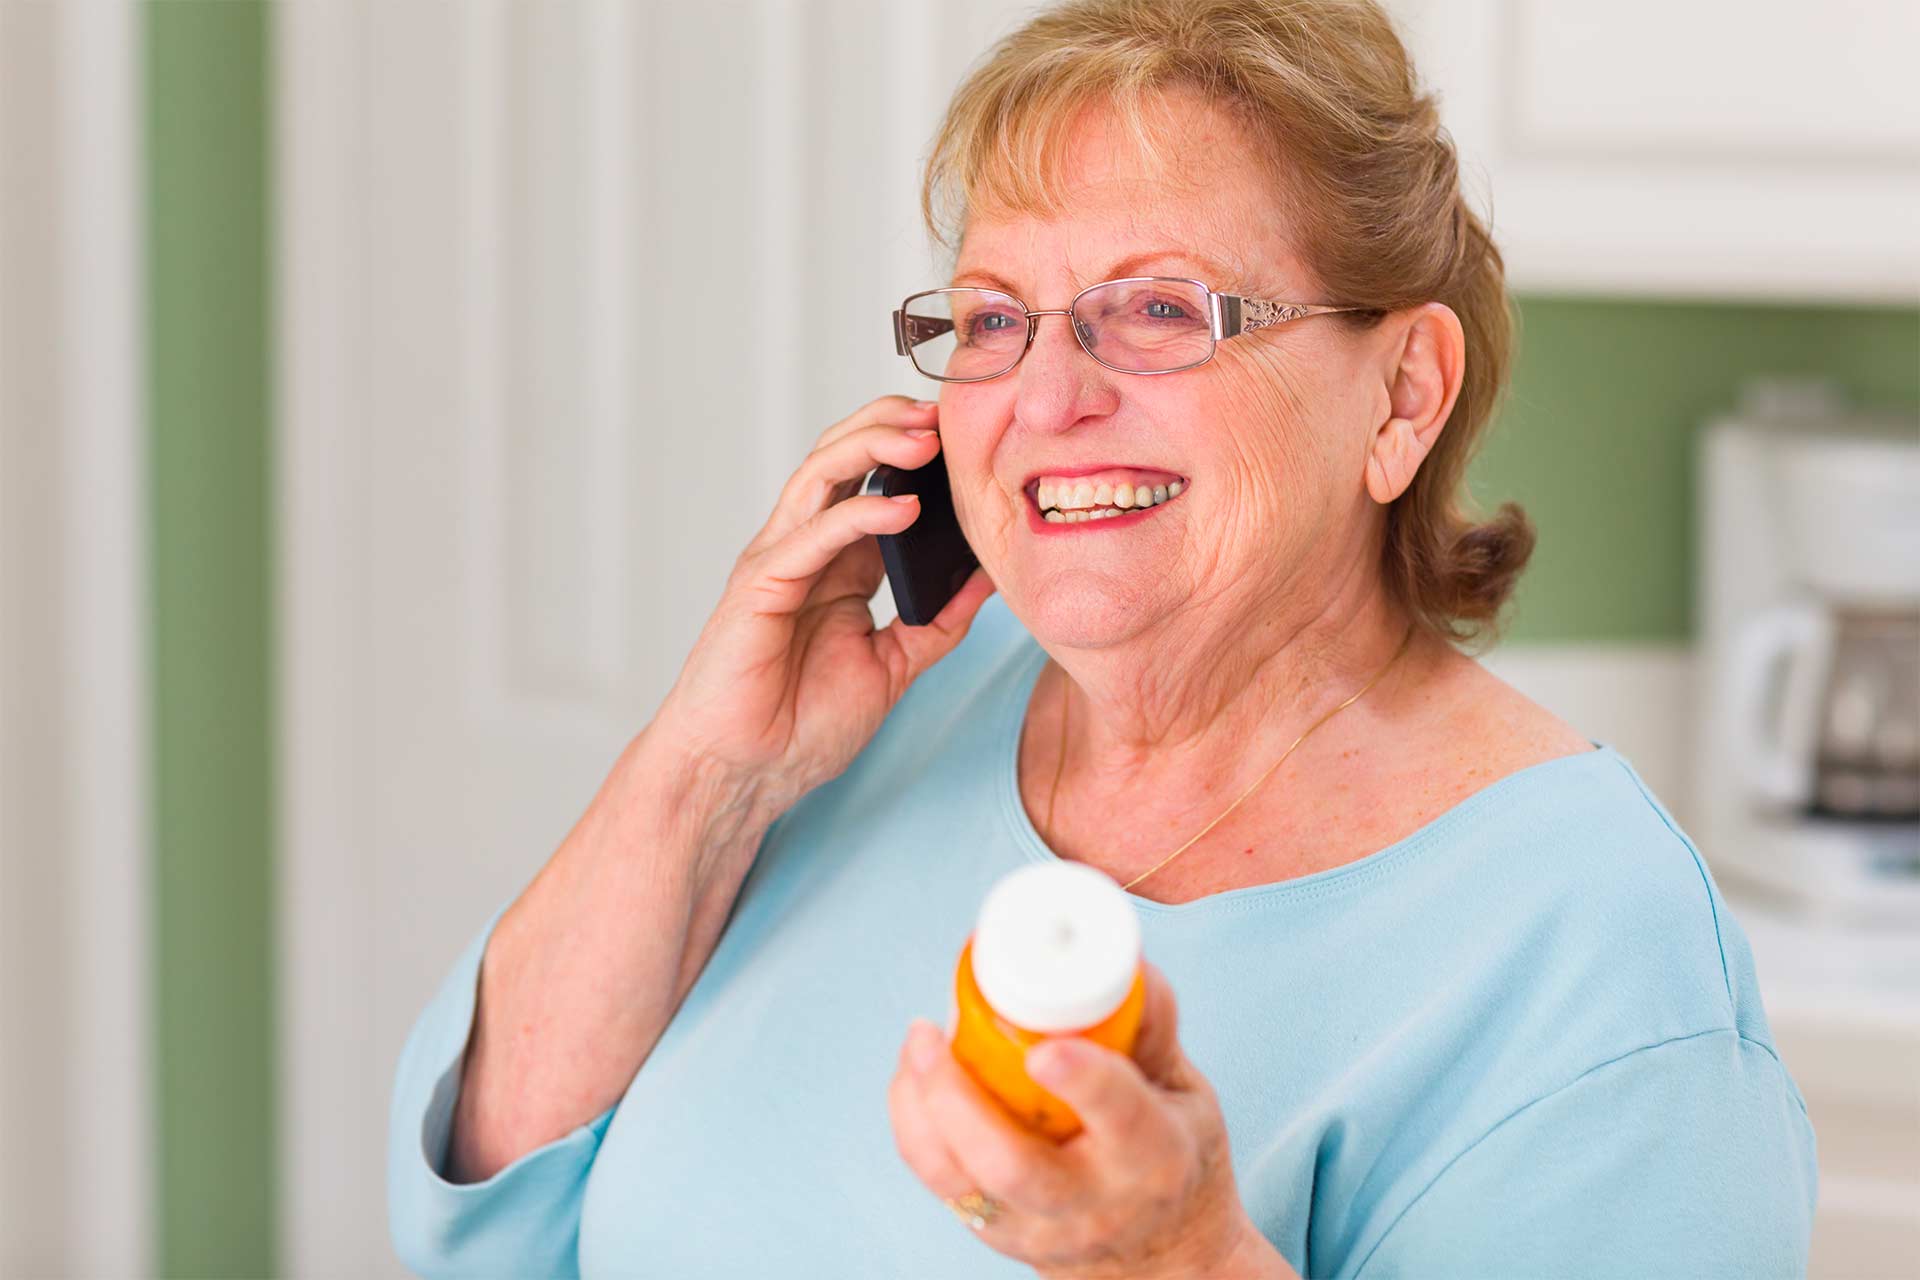 Smiling senior woman on phone holding prescription bottle, asking about drug interactions with cannabis.